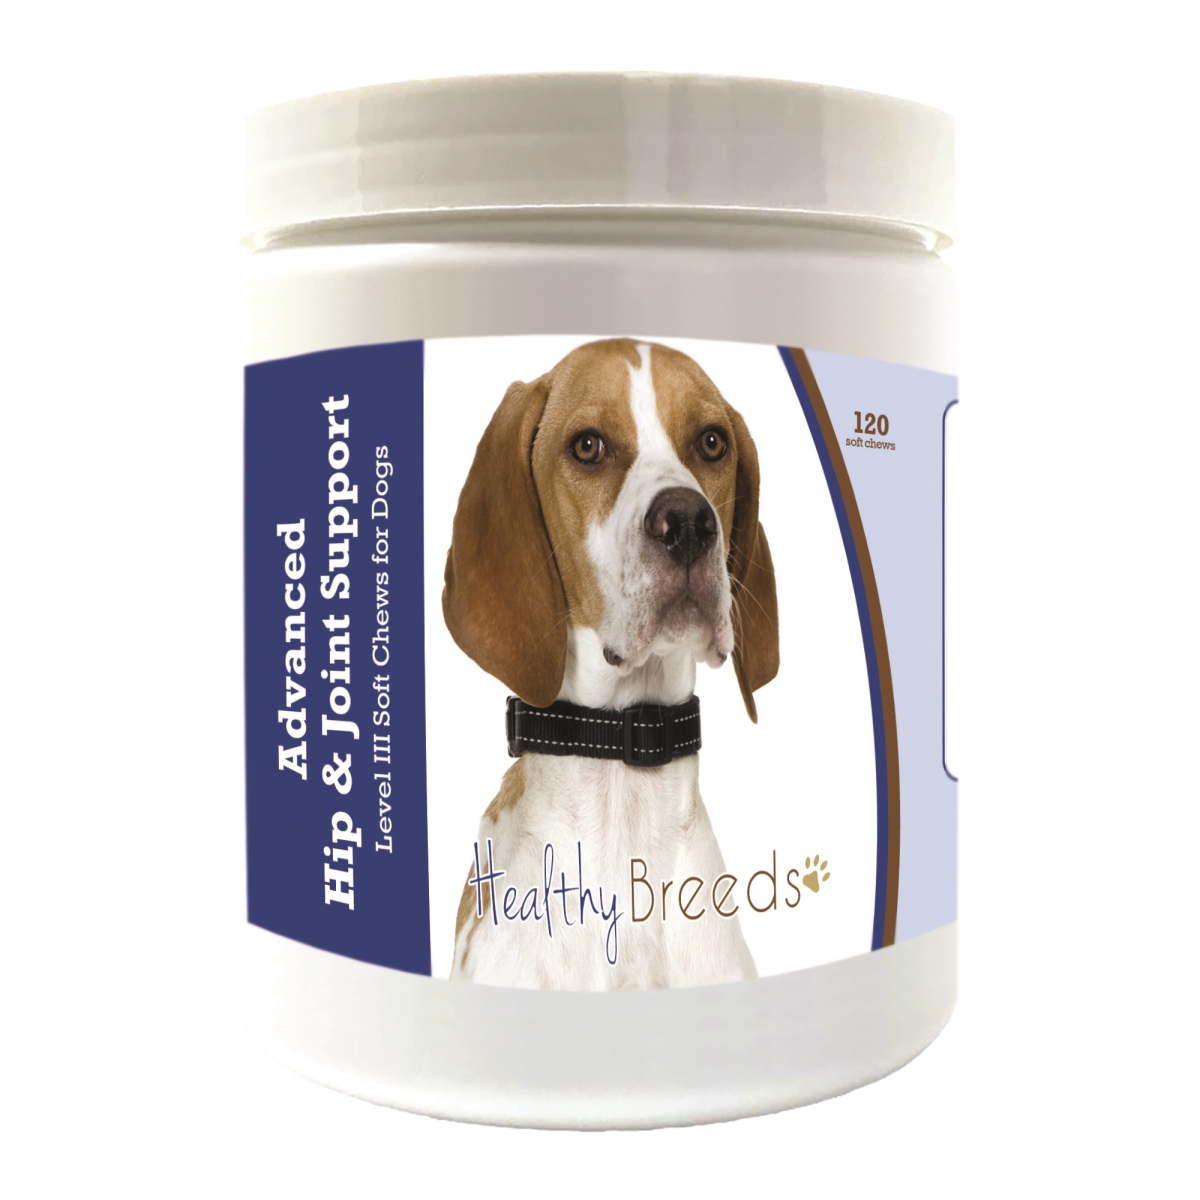 Picture of Healthy Breeds 192959898187 English Pointer Advanced Hip & Joint Support Level III Soft Chews for Dogs